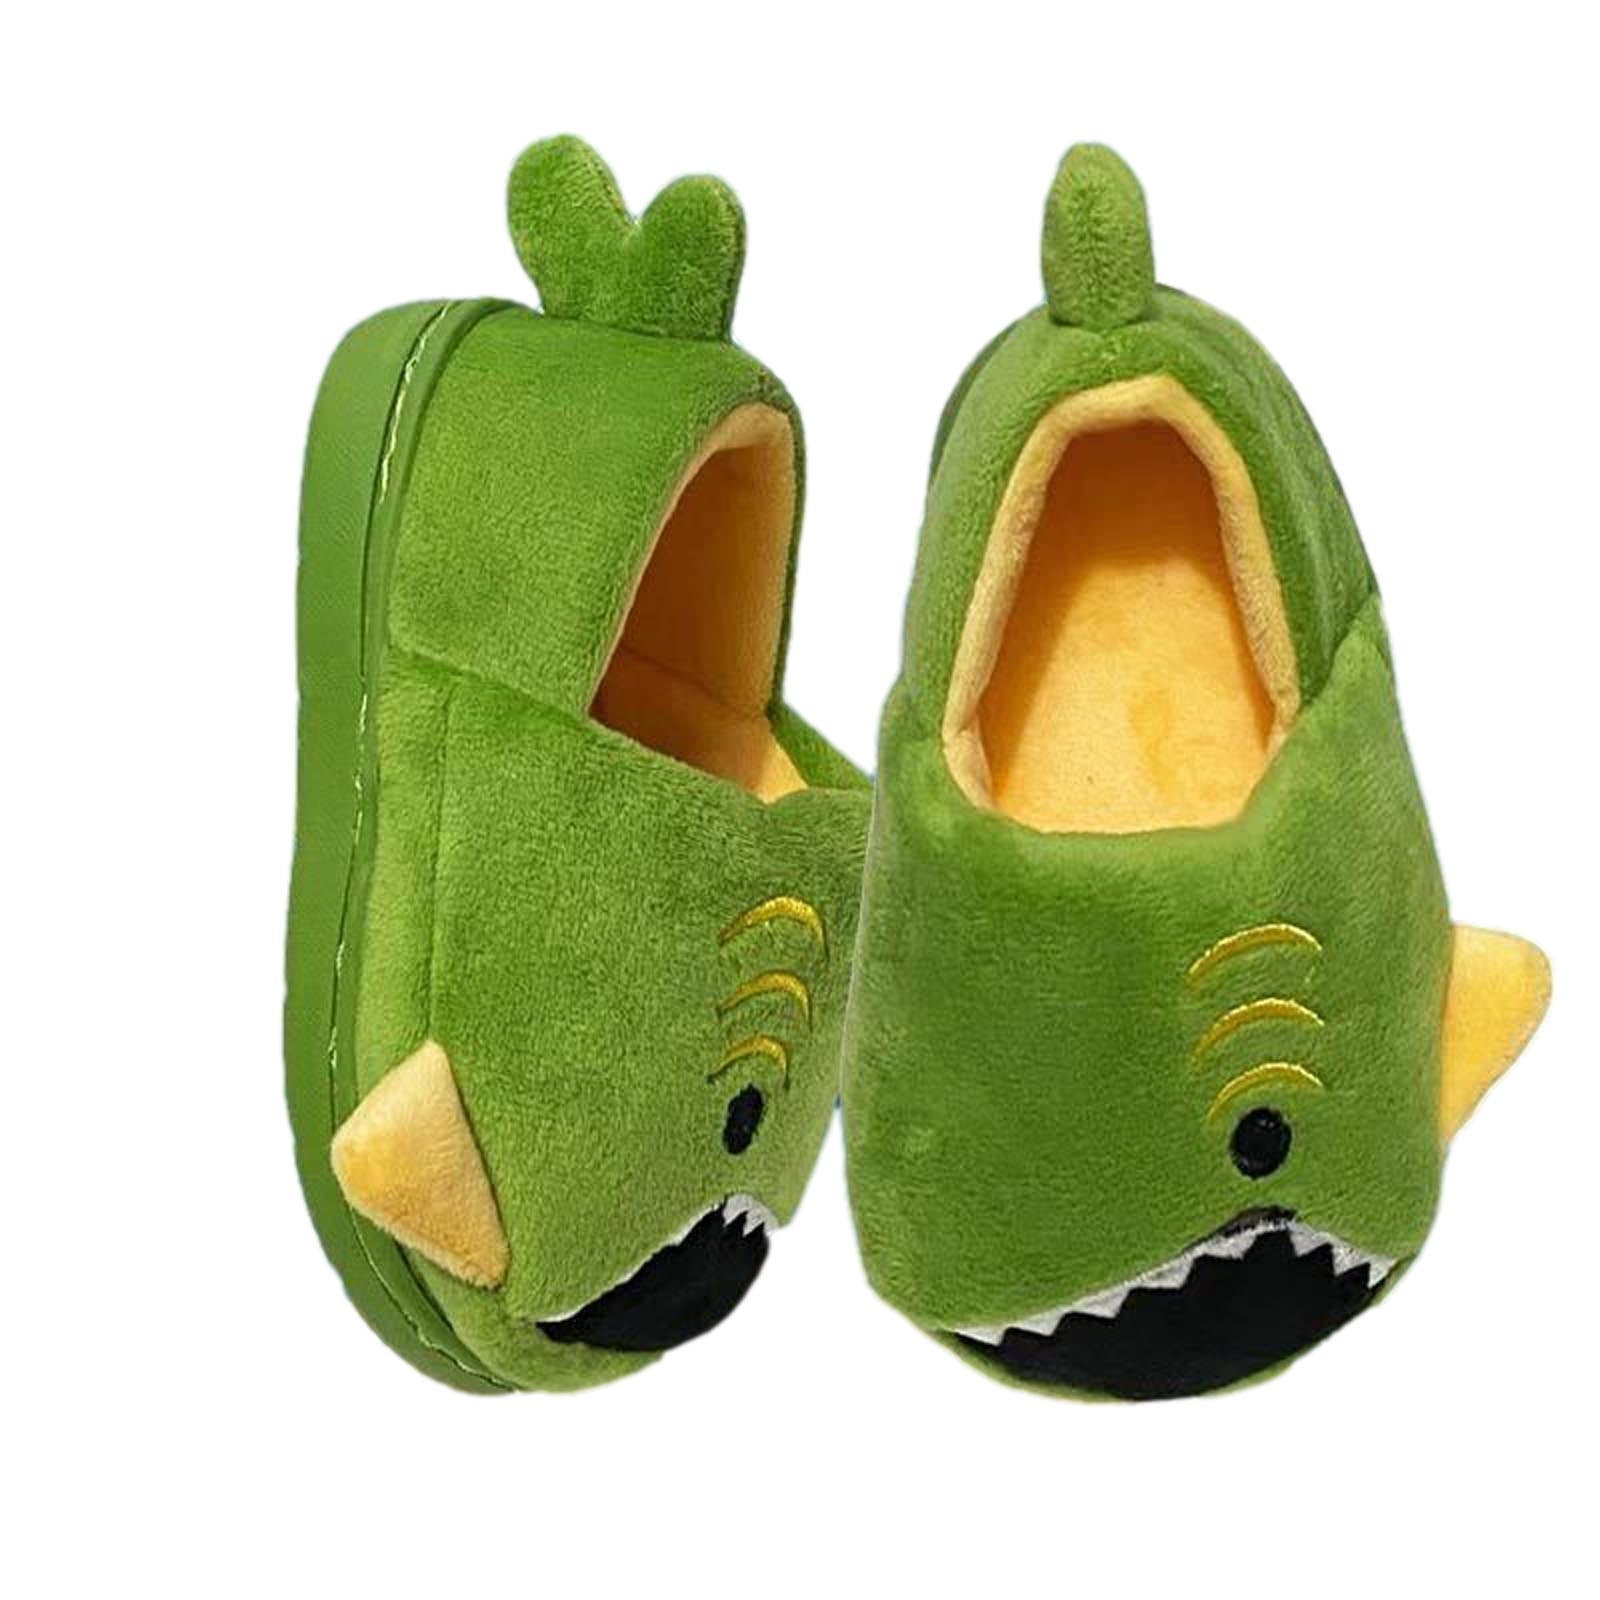 Kids Toddler Shark Slippers Boys Girls Warm Cute Home Slippers Cartoon Slippers Soft Sole Winter Indoor House Slippers